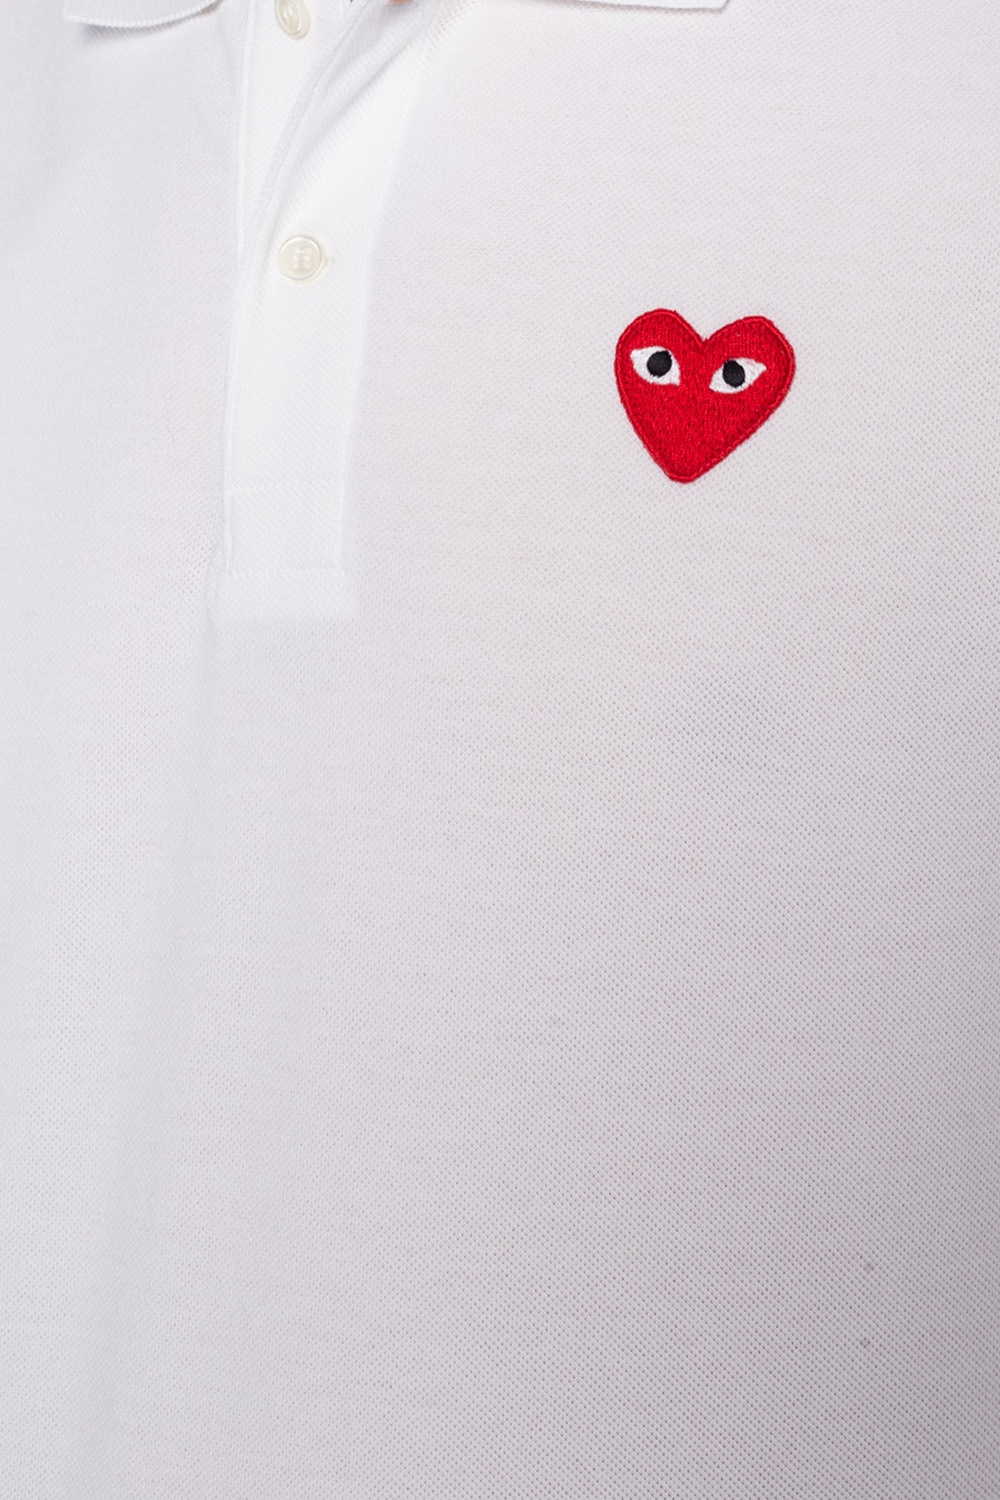 Comme des Garcons Play Logo-patched polo shirt